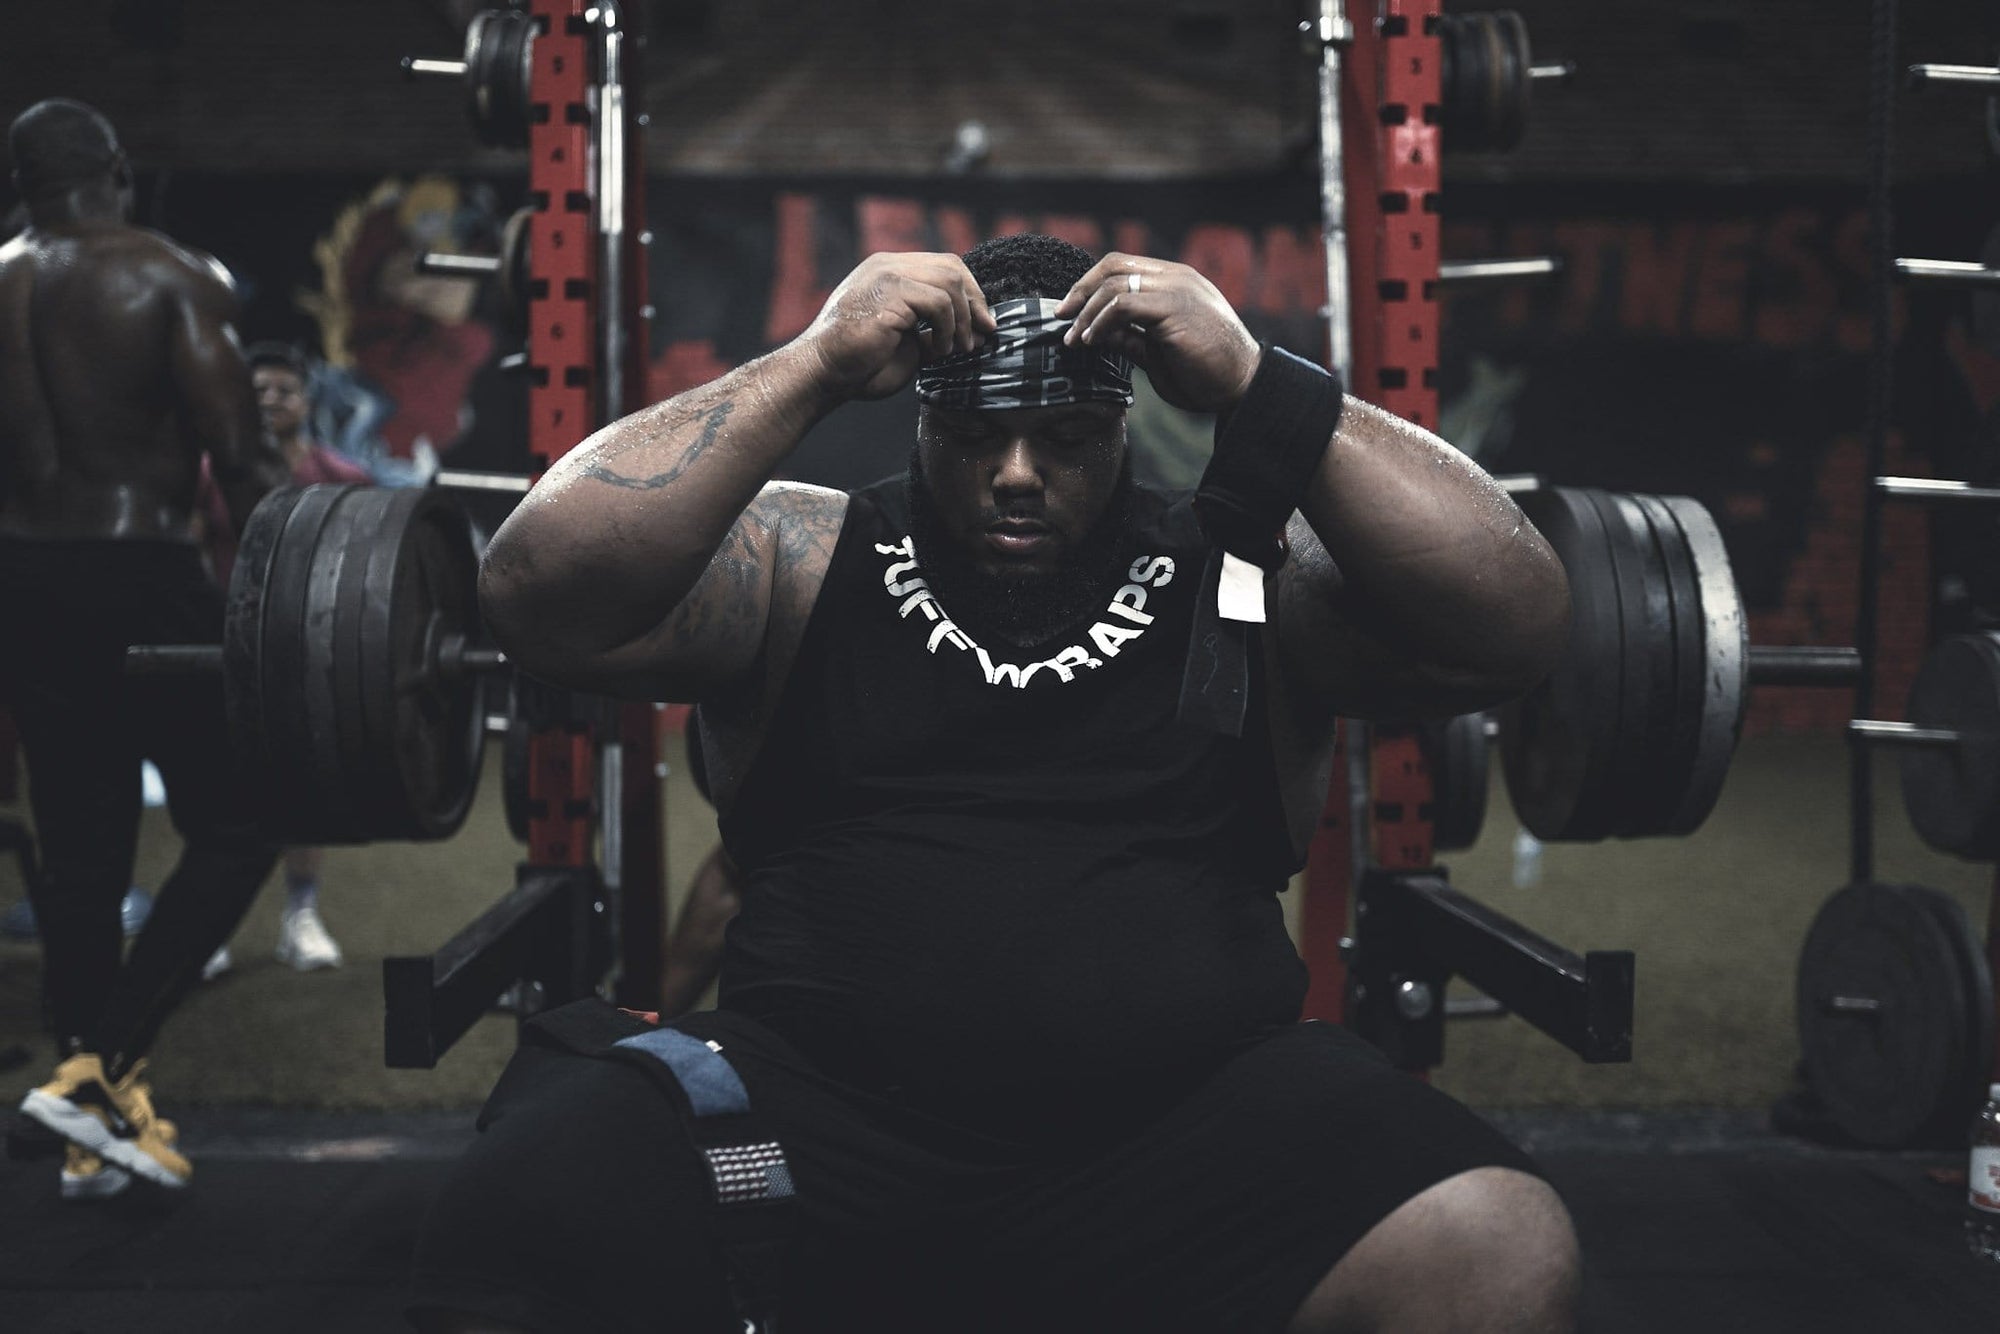 Julius Maddox Does The Impossible, 700 lb Bench Press for 3 Reps!